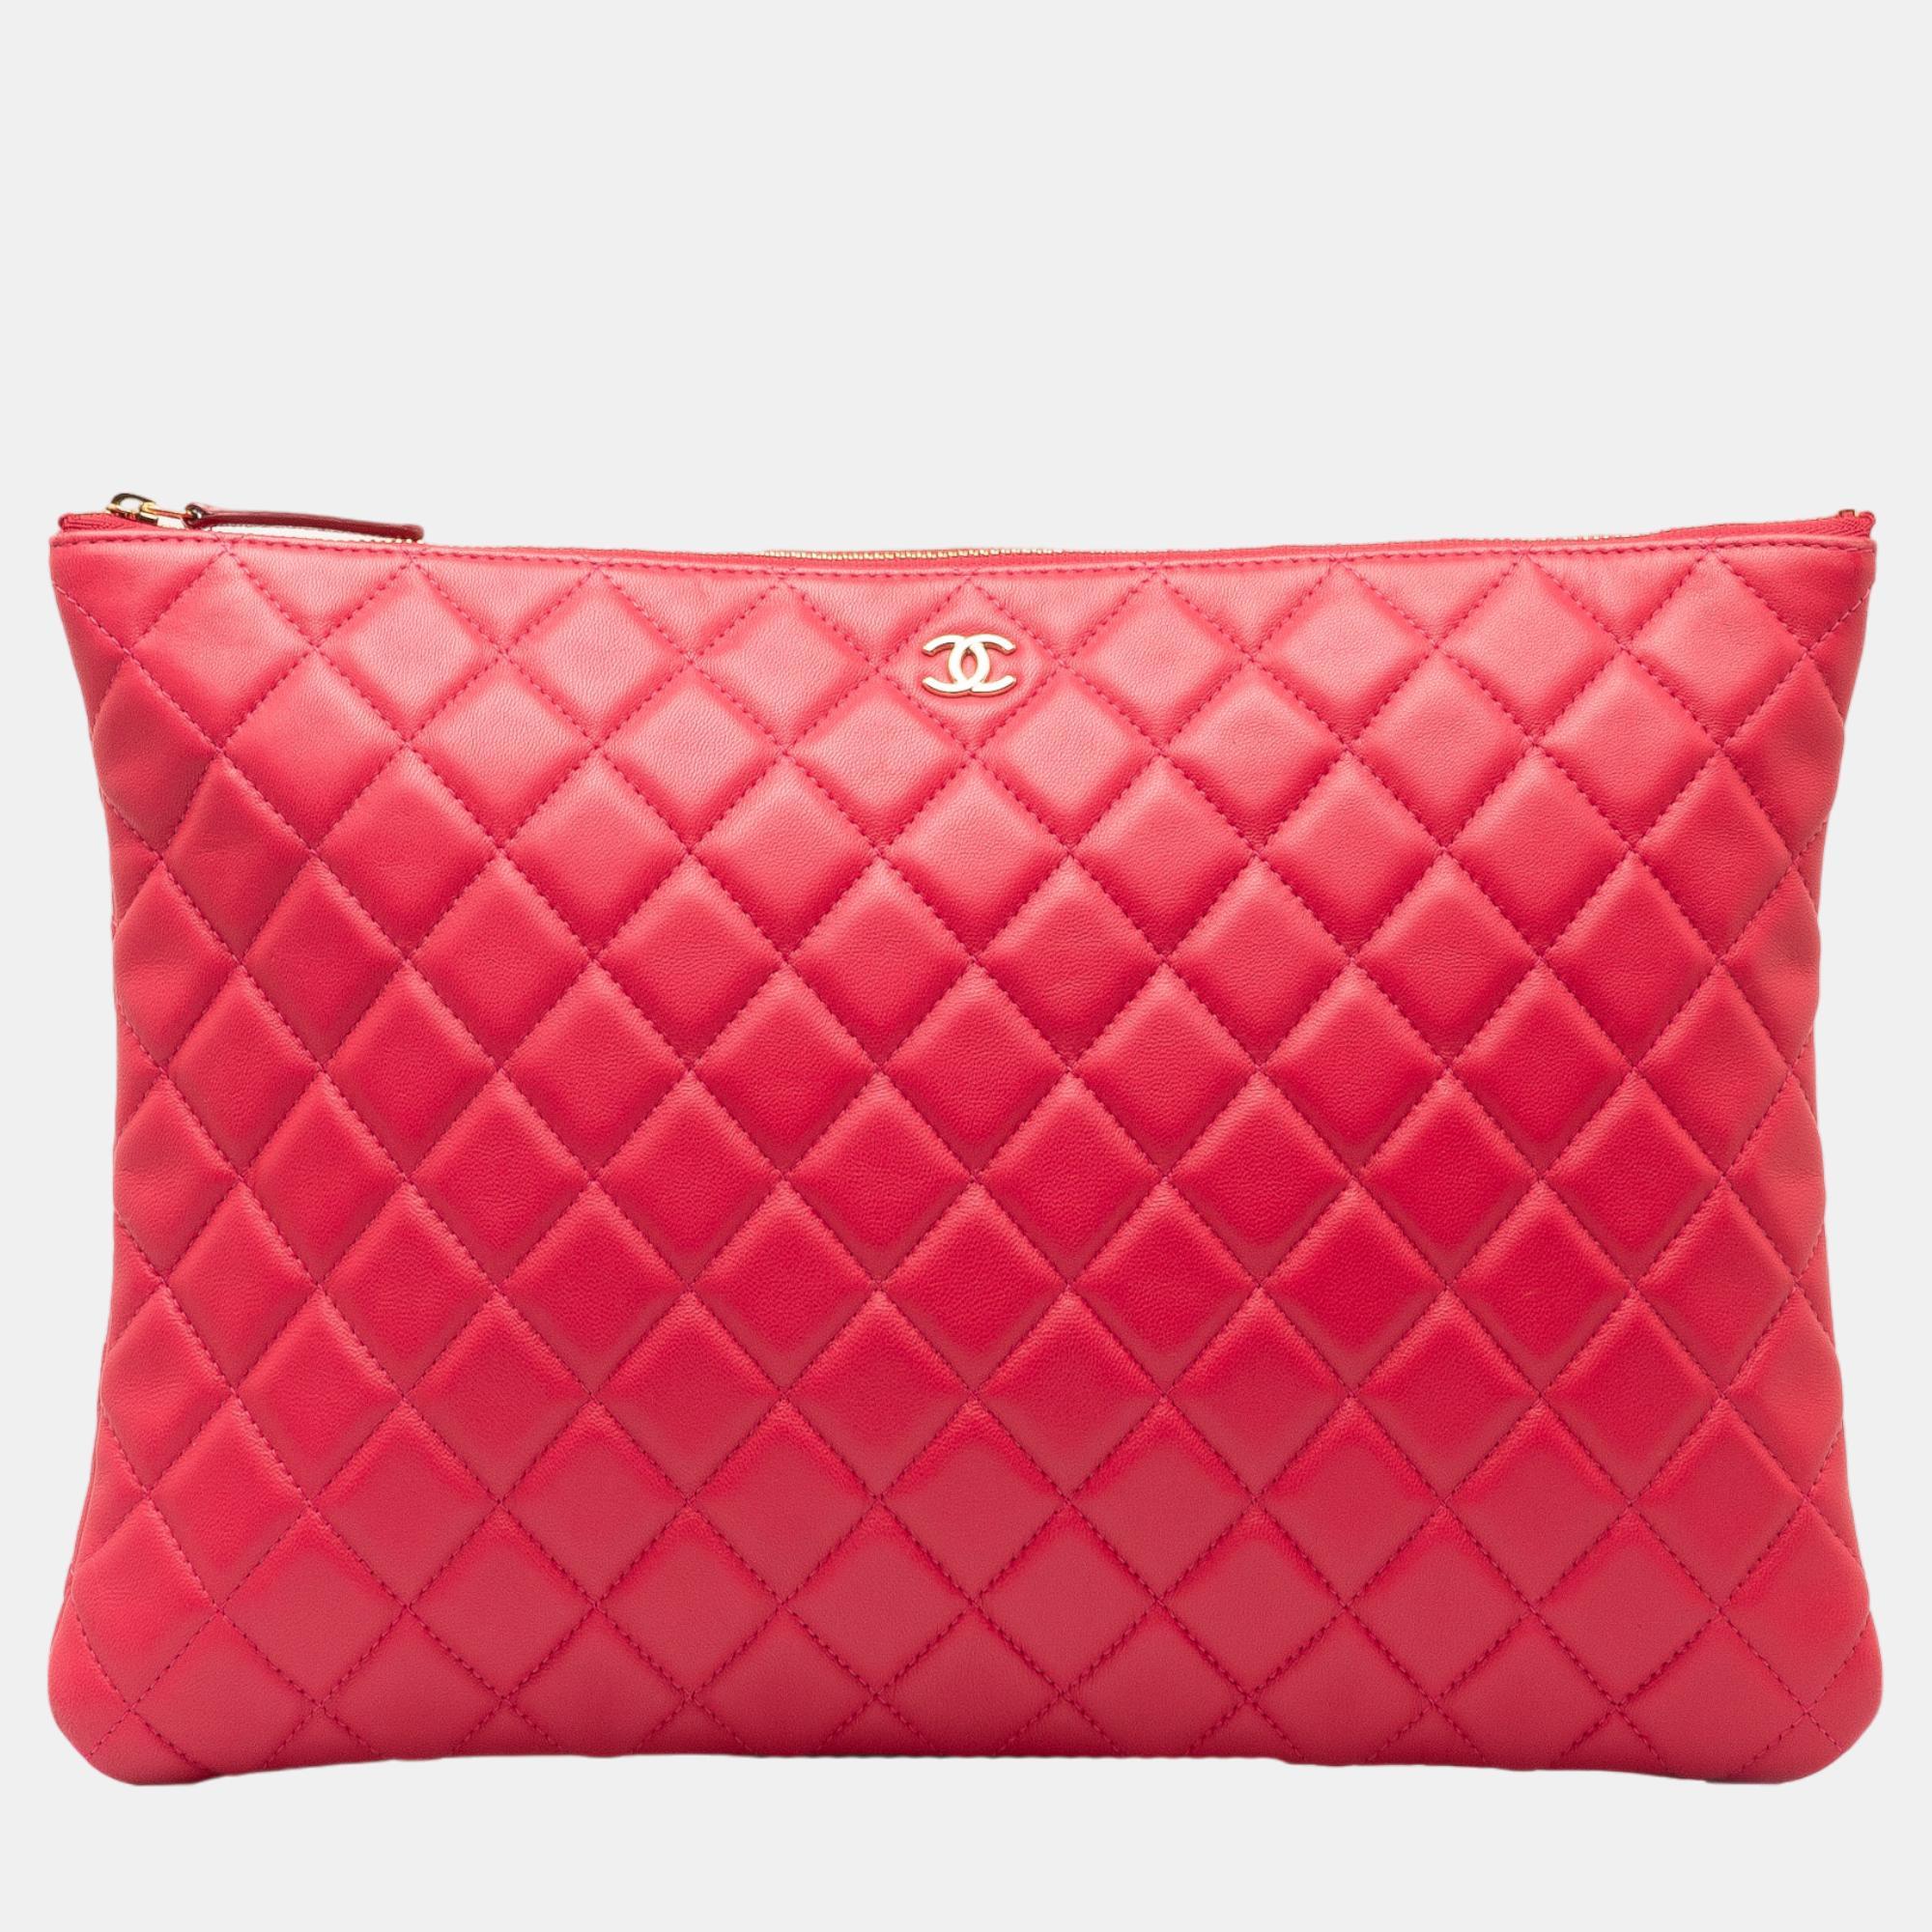 Chanel pink quilted o case clutch